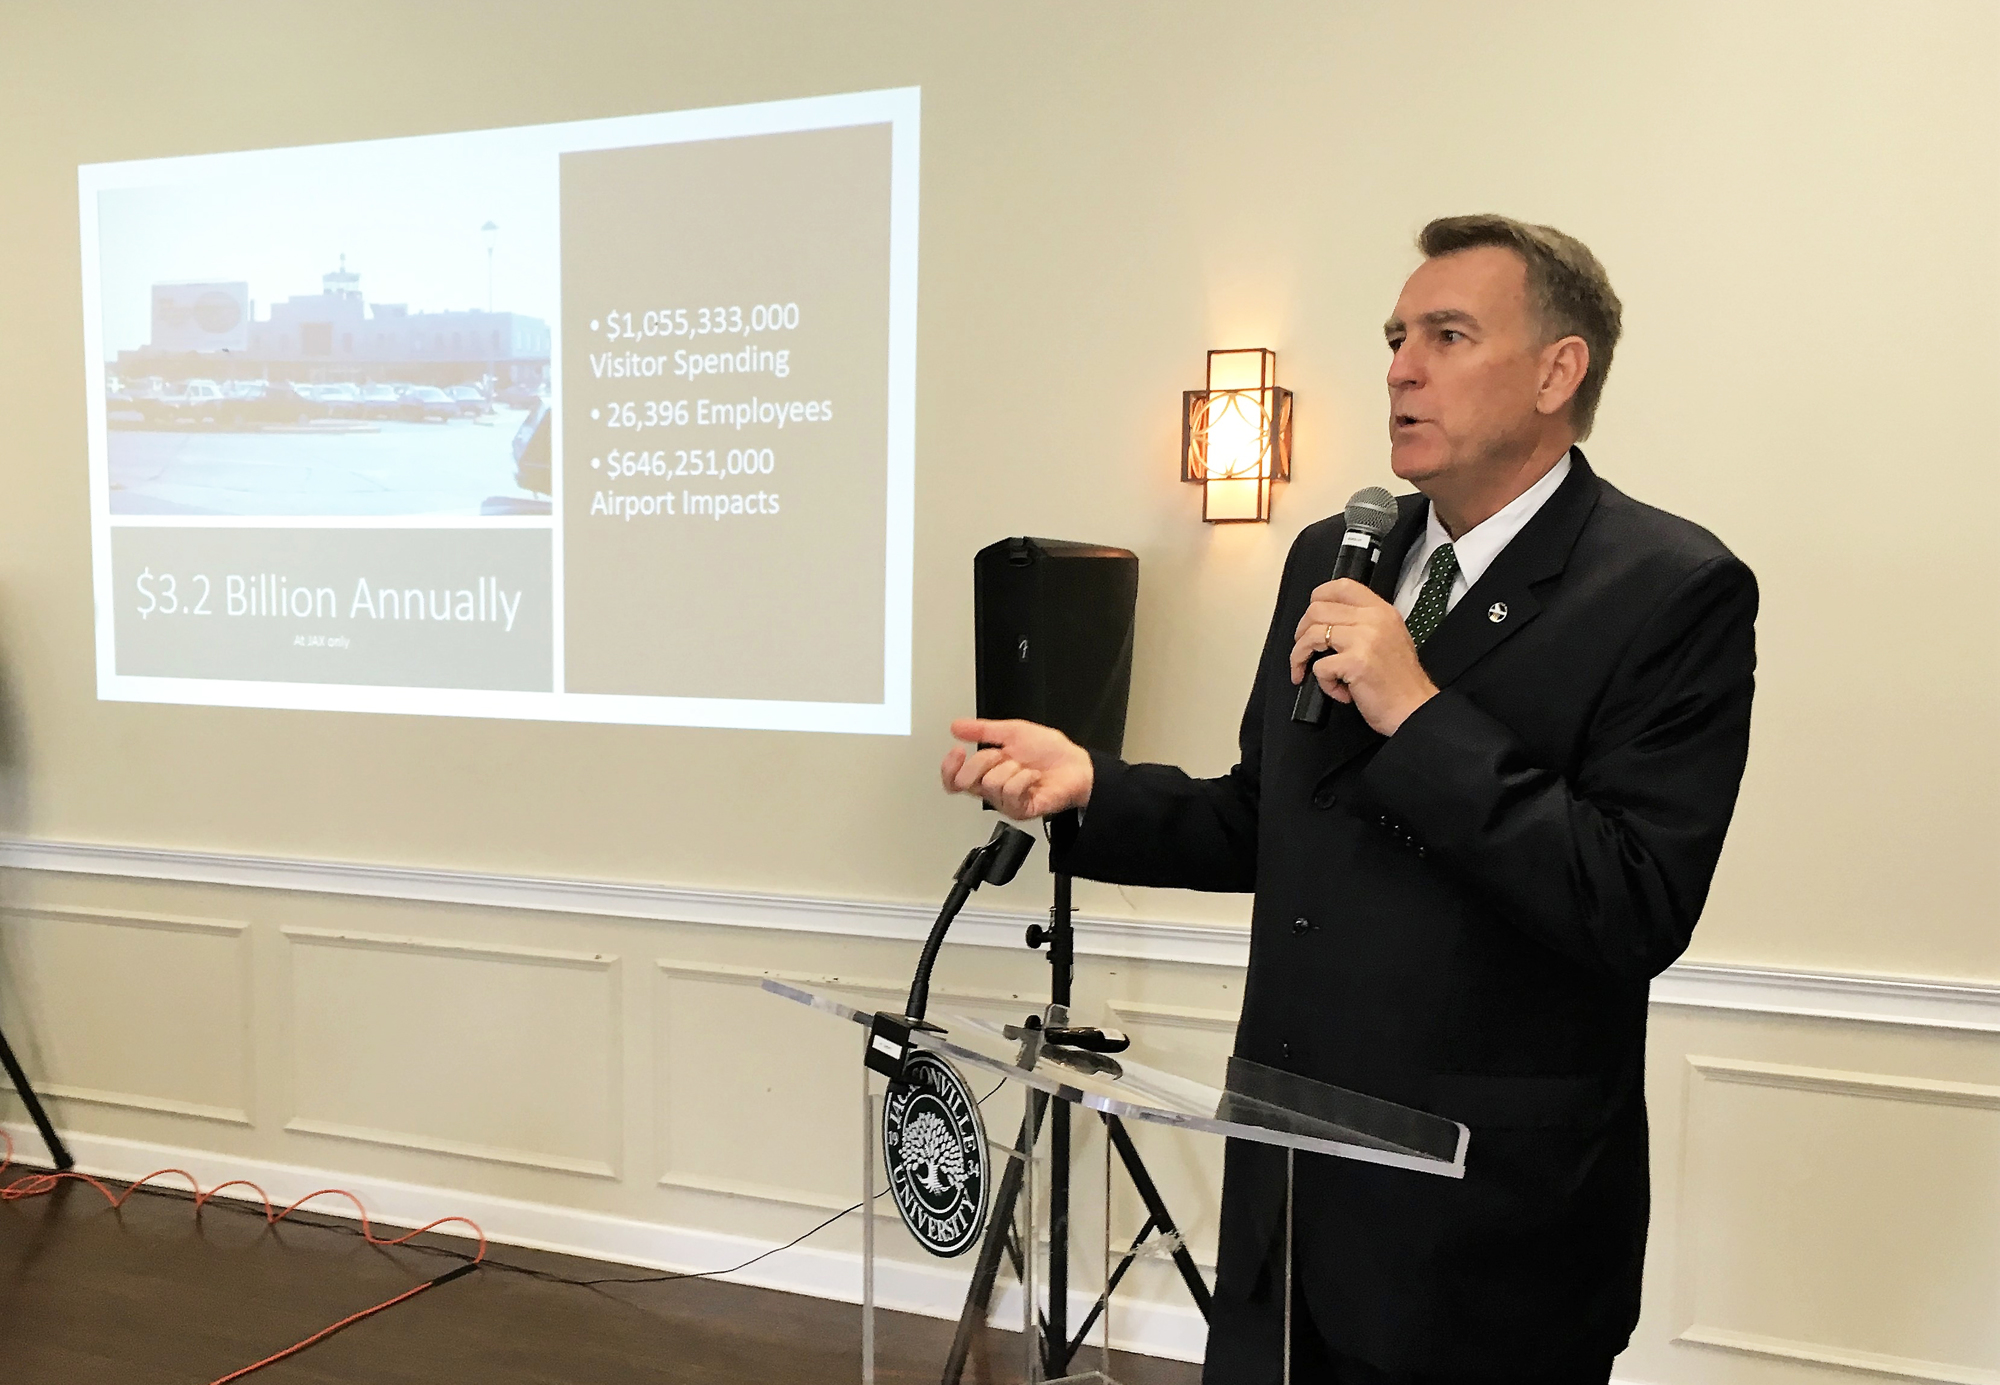 Jacksonville Aviation Authority CEO Mark VanLoh makes his presentation to the Economic Roundtable of Jacksonville on Tuesday. (Photo by Caren Burmeister )